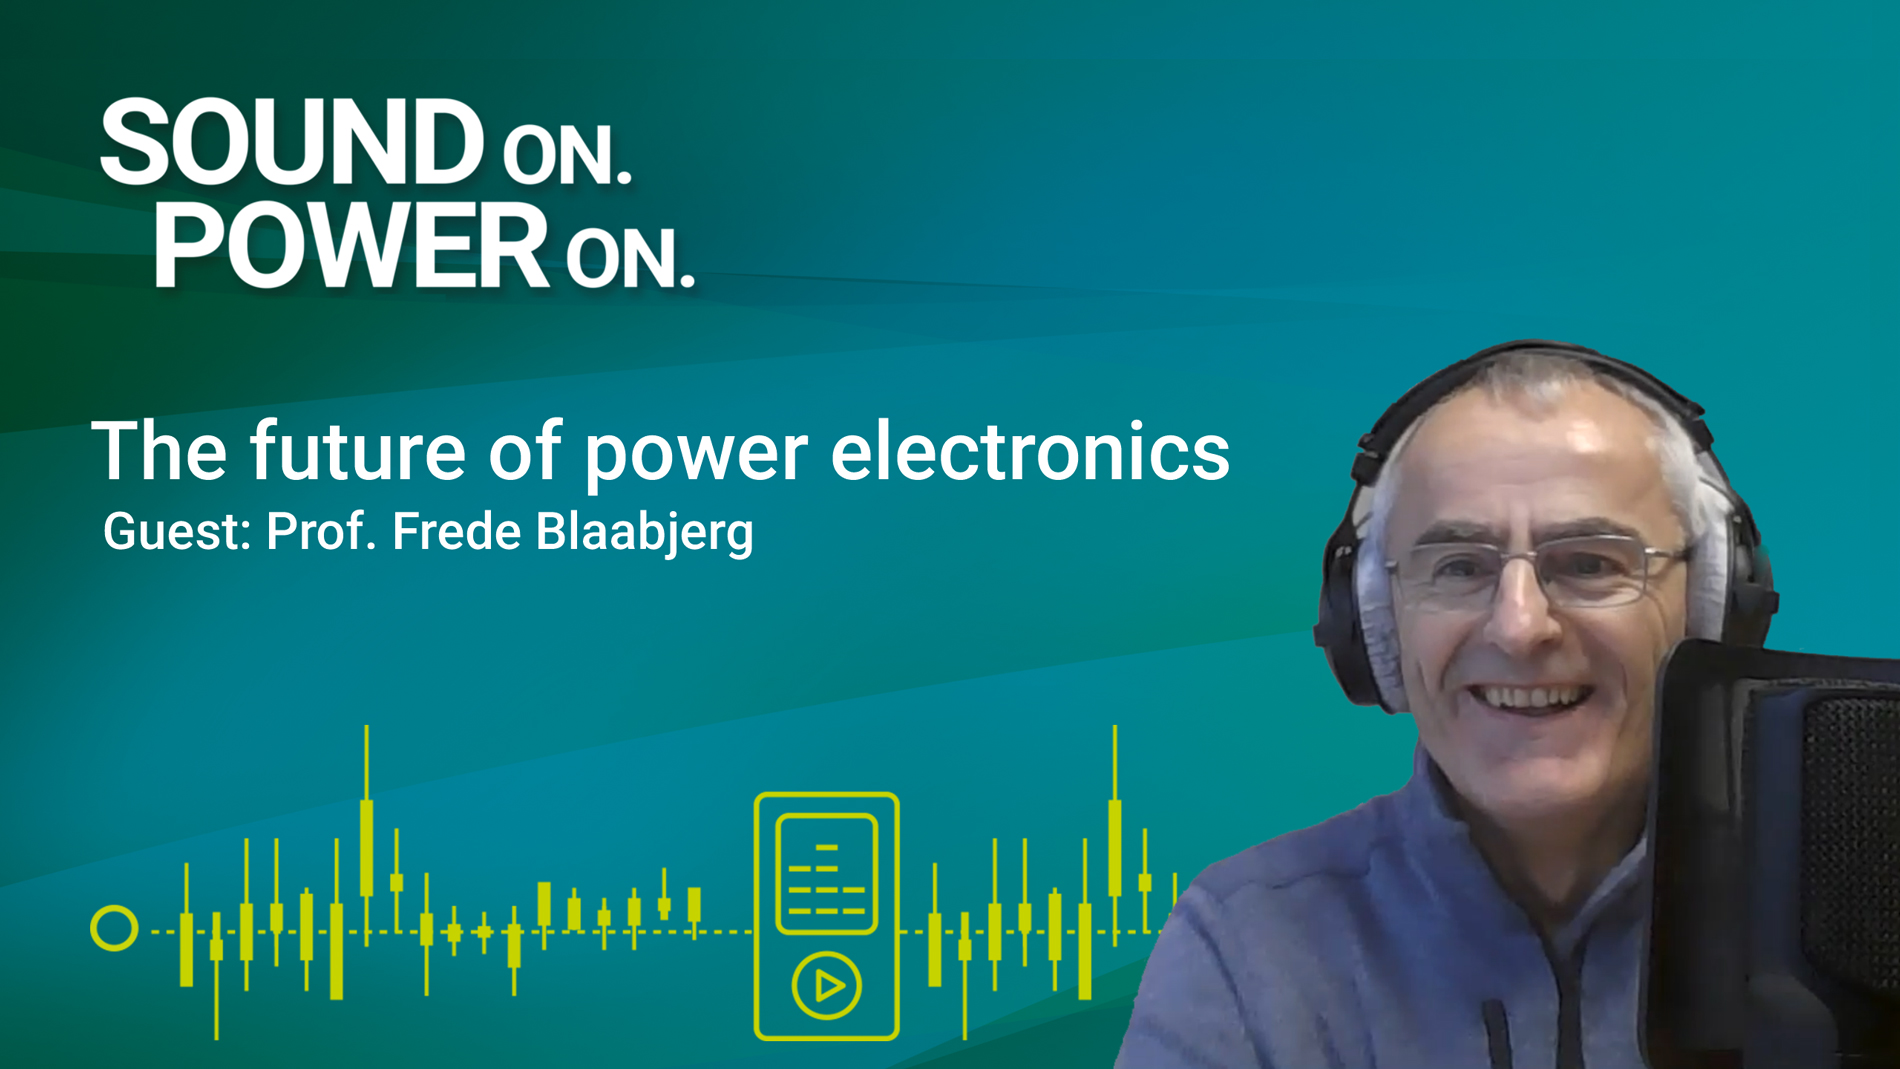 “Future trends in power electronics” with Frede Blaabjerg, Aalborg University